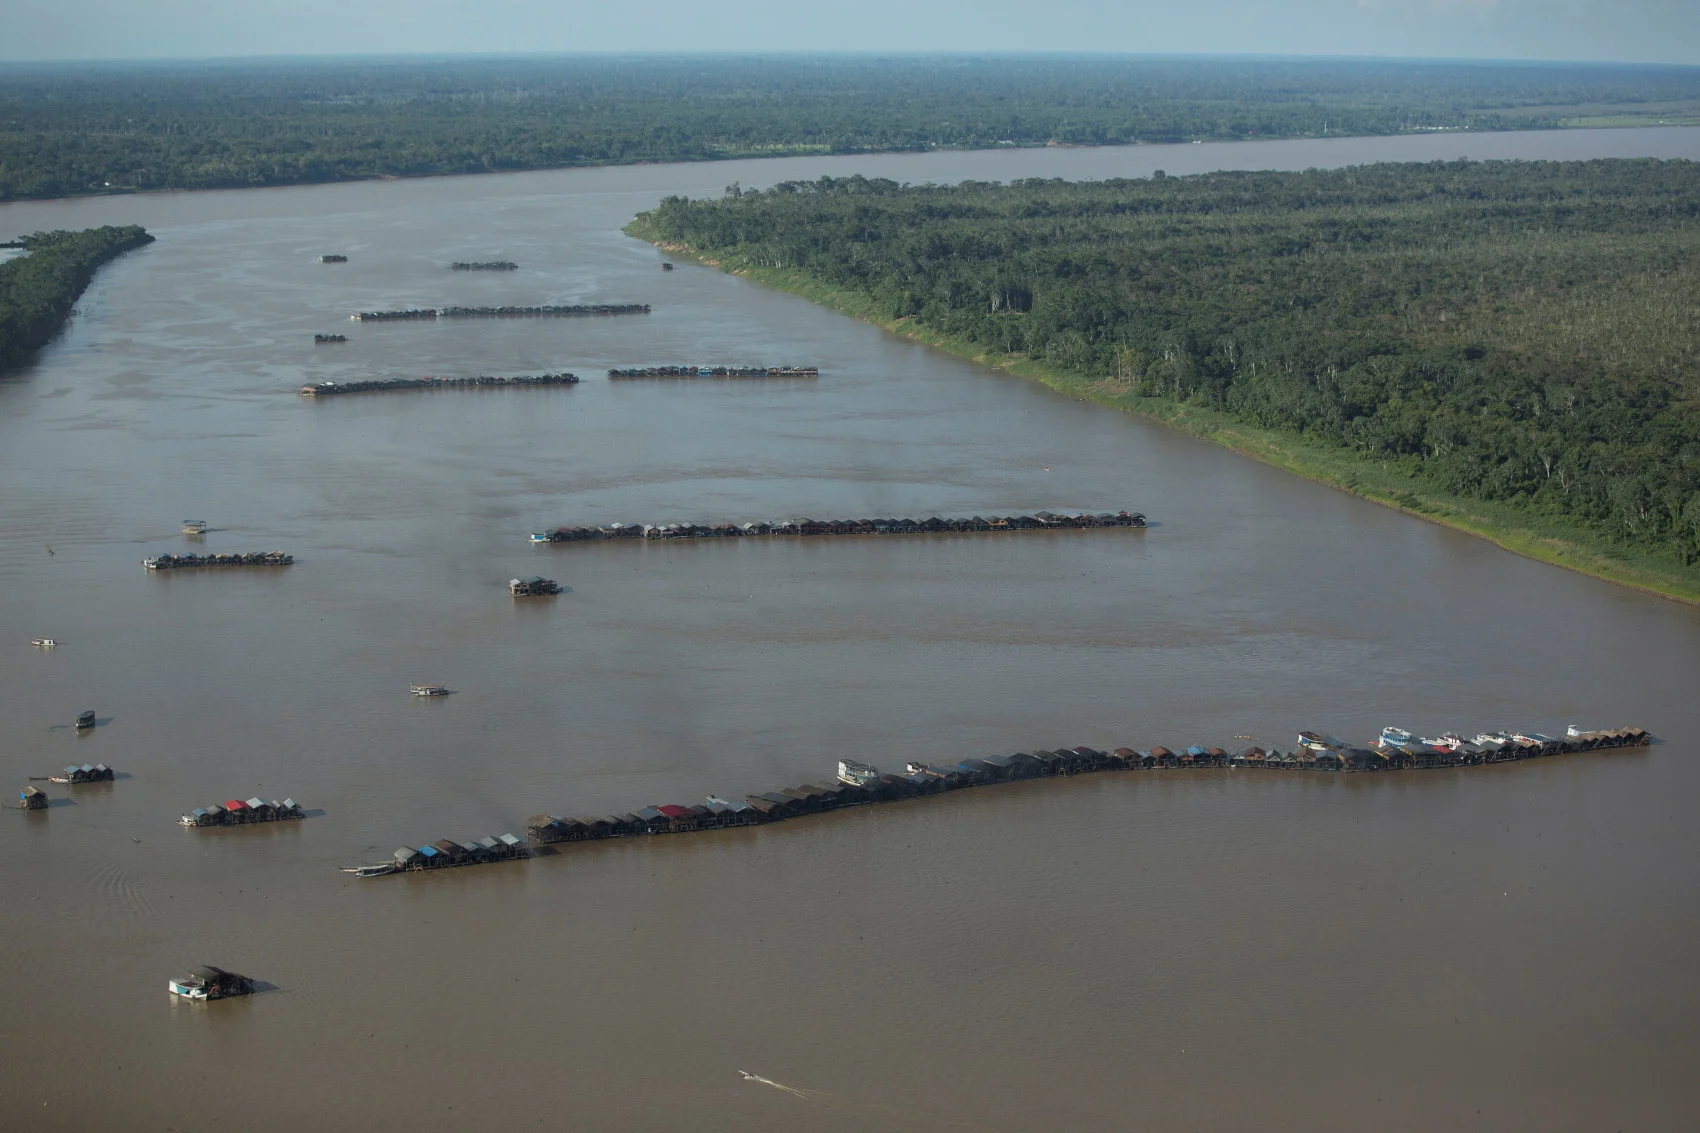 Gold rush draws hundreds of dredging rafts to Amazon tributary